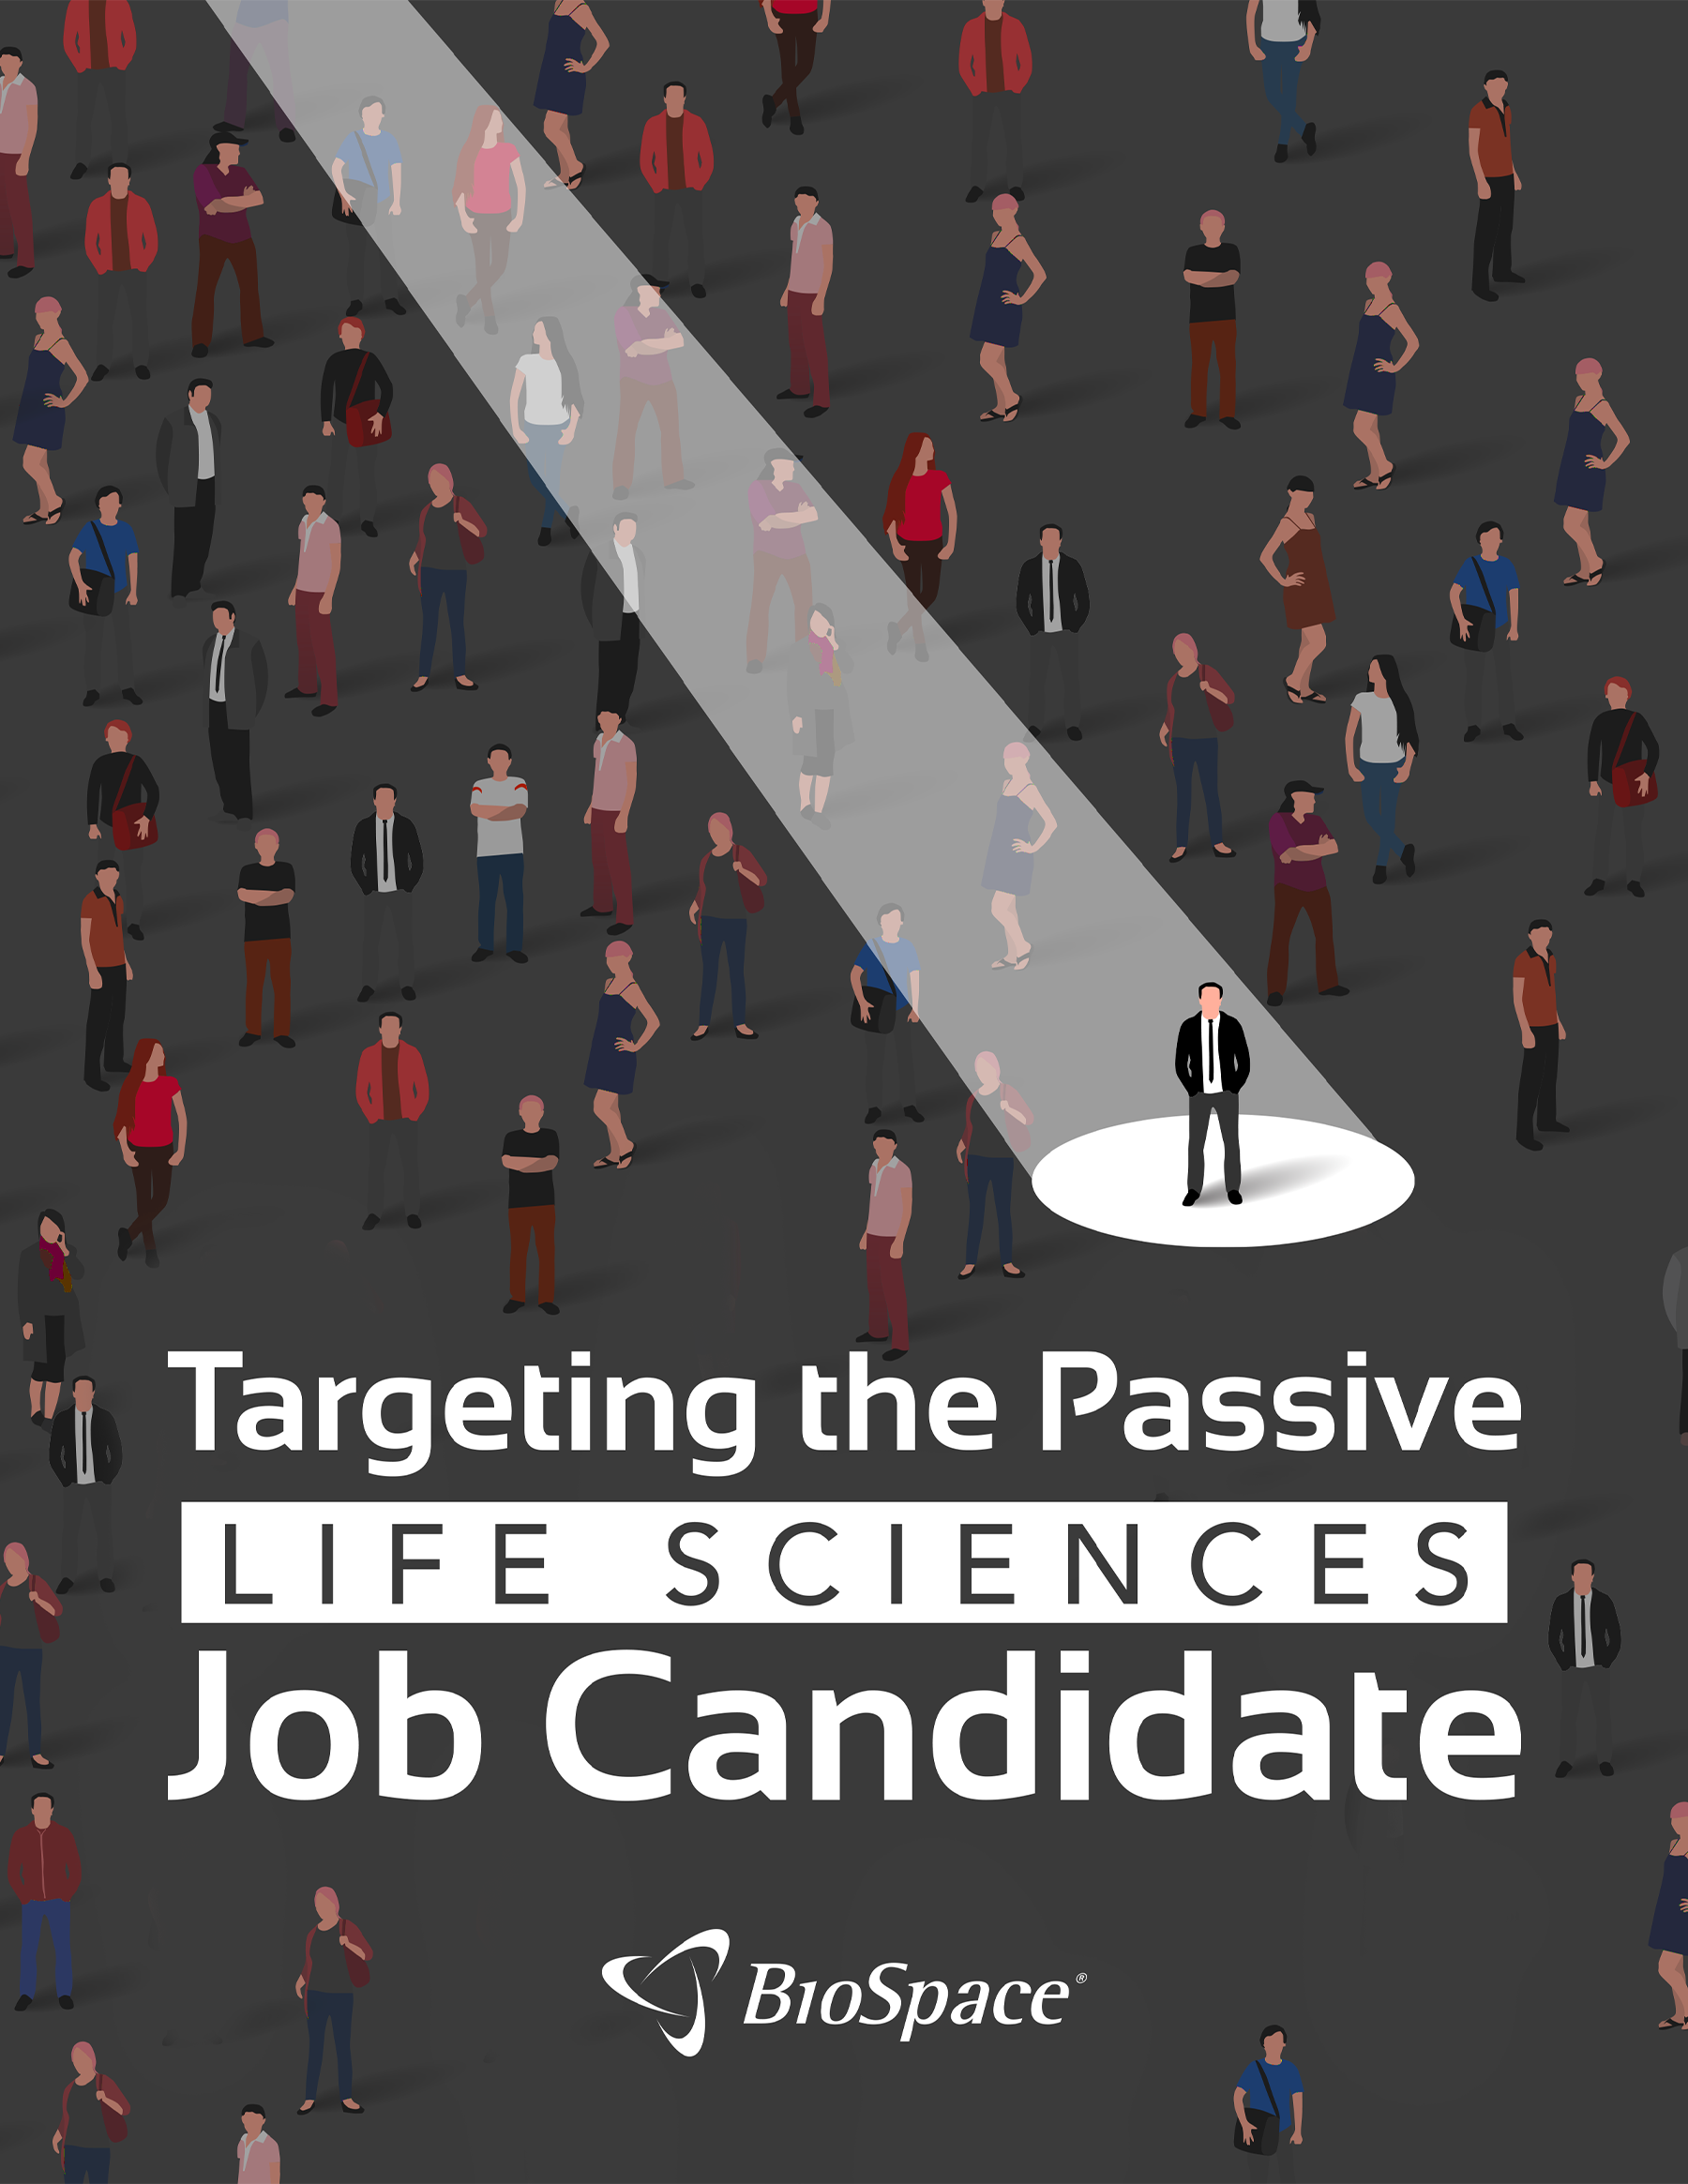 Employer Insights - 202003 - Targeting the Passive Life Sciences Job Candidate